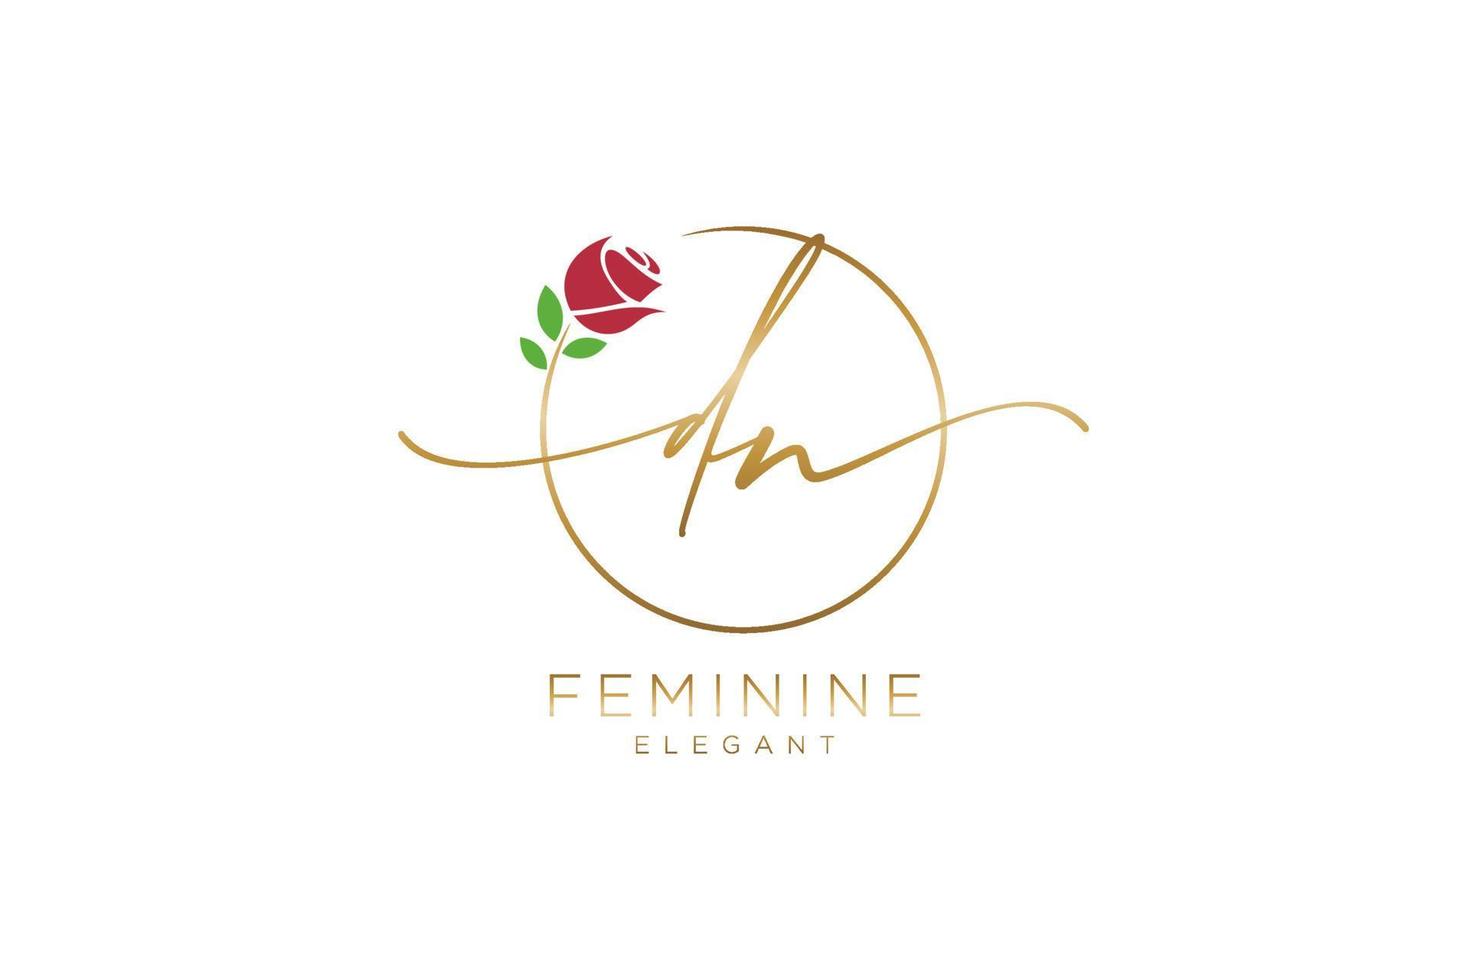 initial DN Feminine logo beauty monogram and elegant logo design, handwriting logo of initial signature, wedding, fashion, floral and botanical with creative template. vector